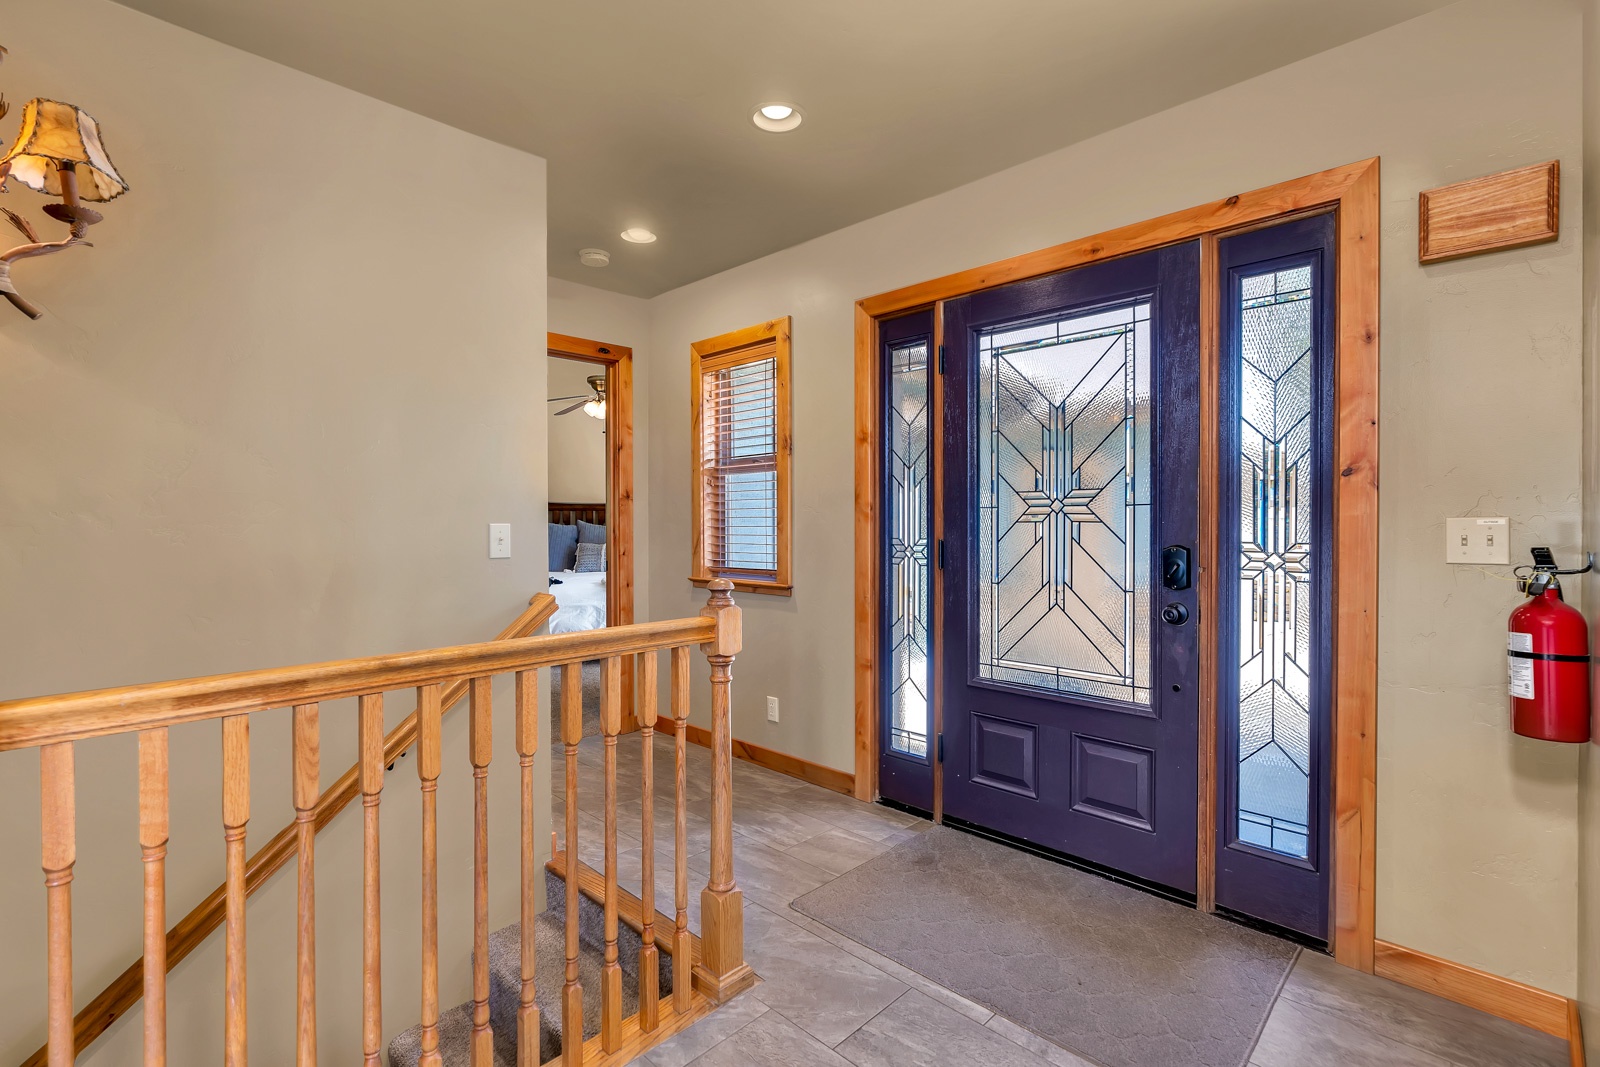 A bright, spacious entryway will welcome you home